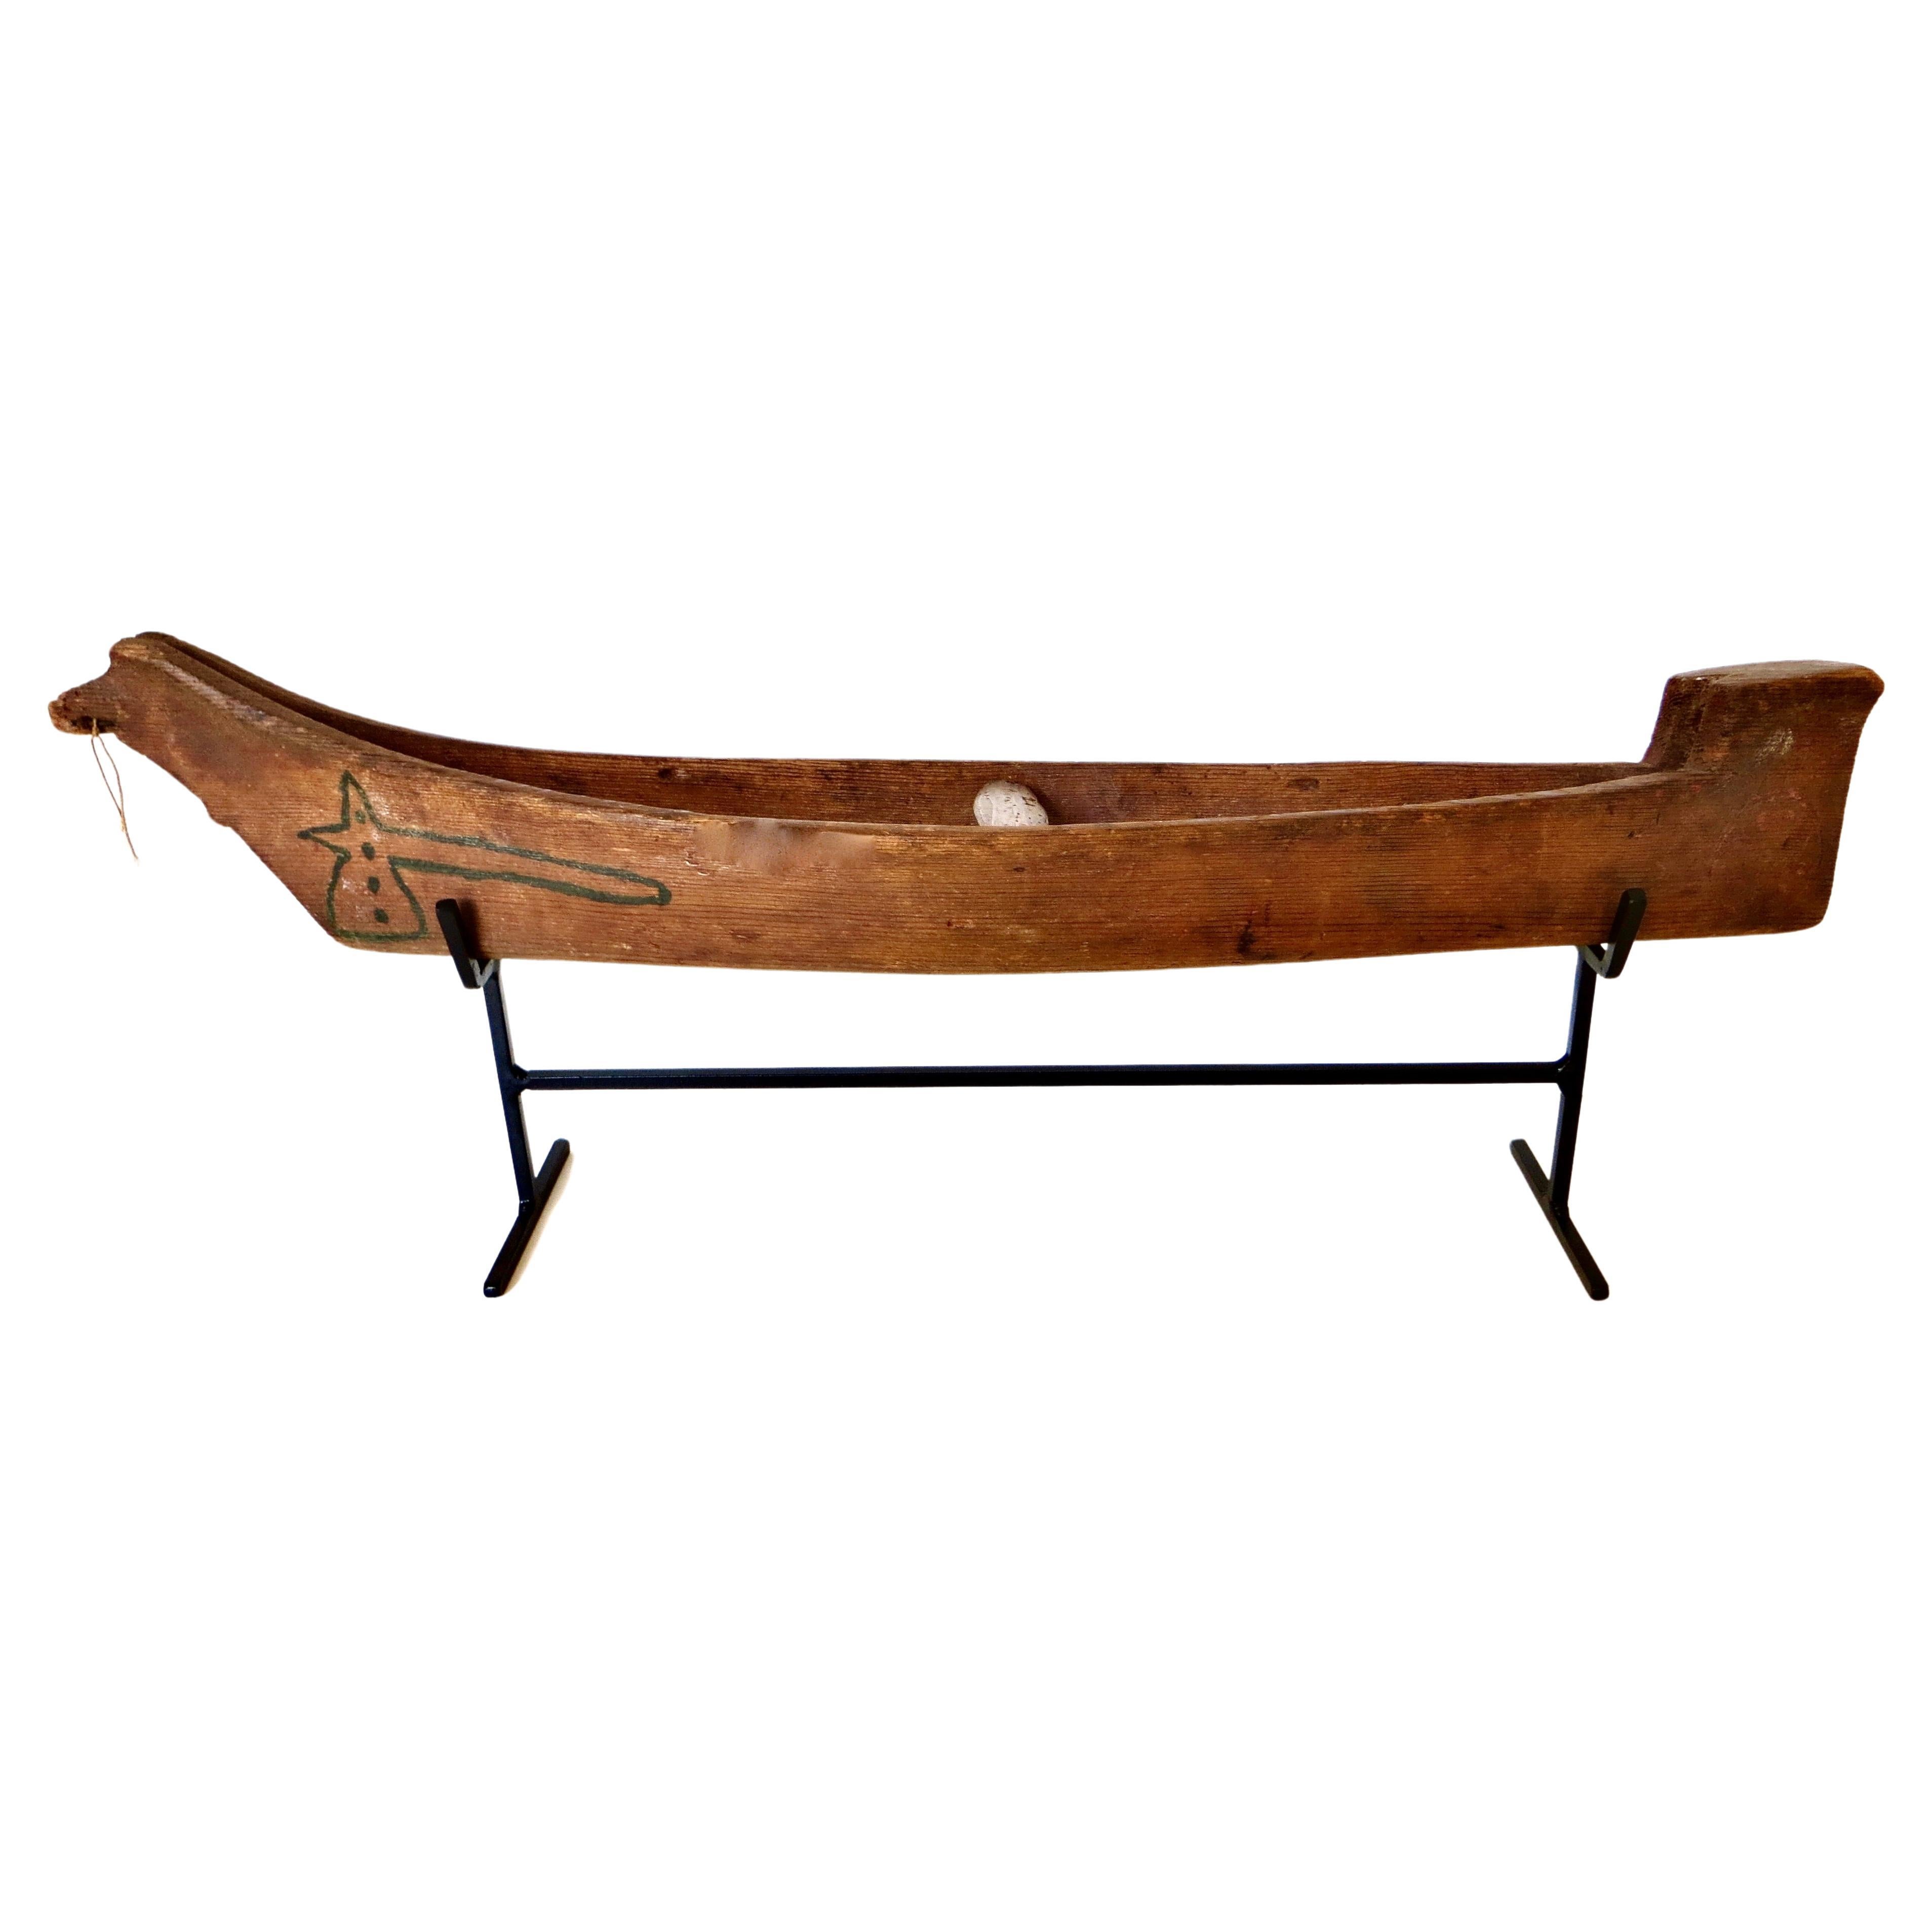  Model Canoe by Native North American Indians, C.1930